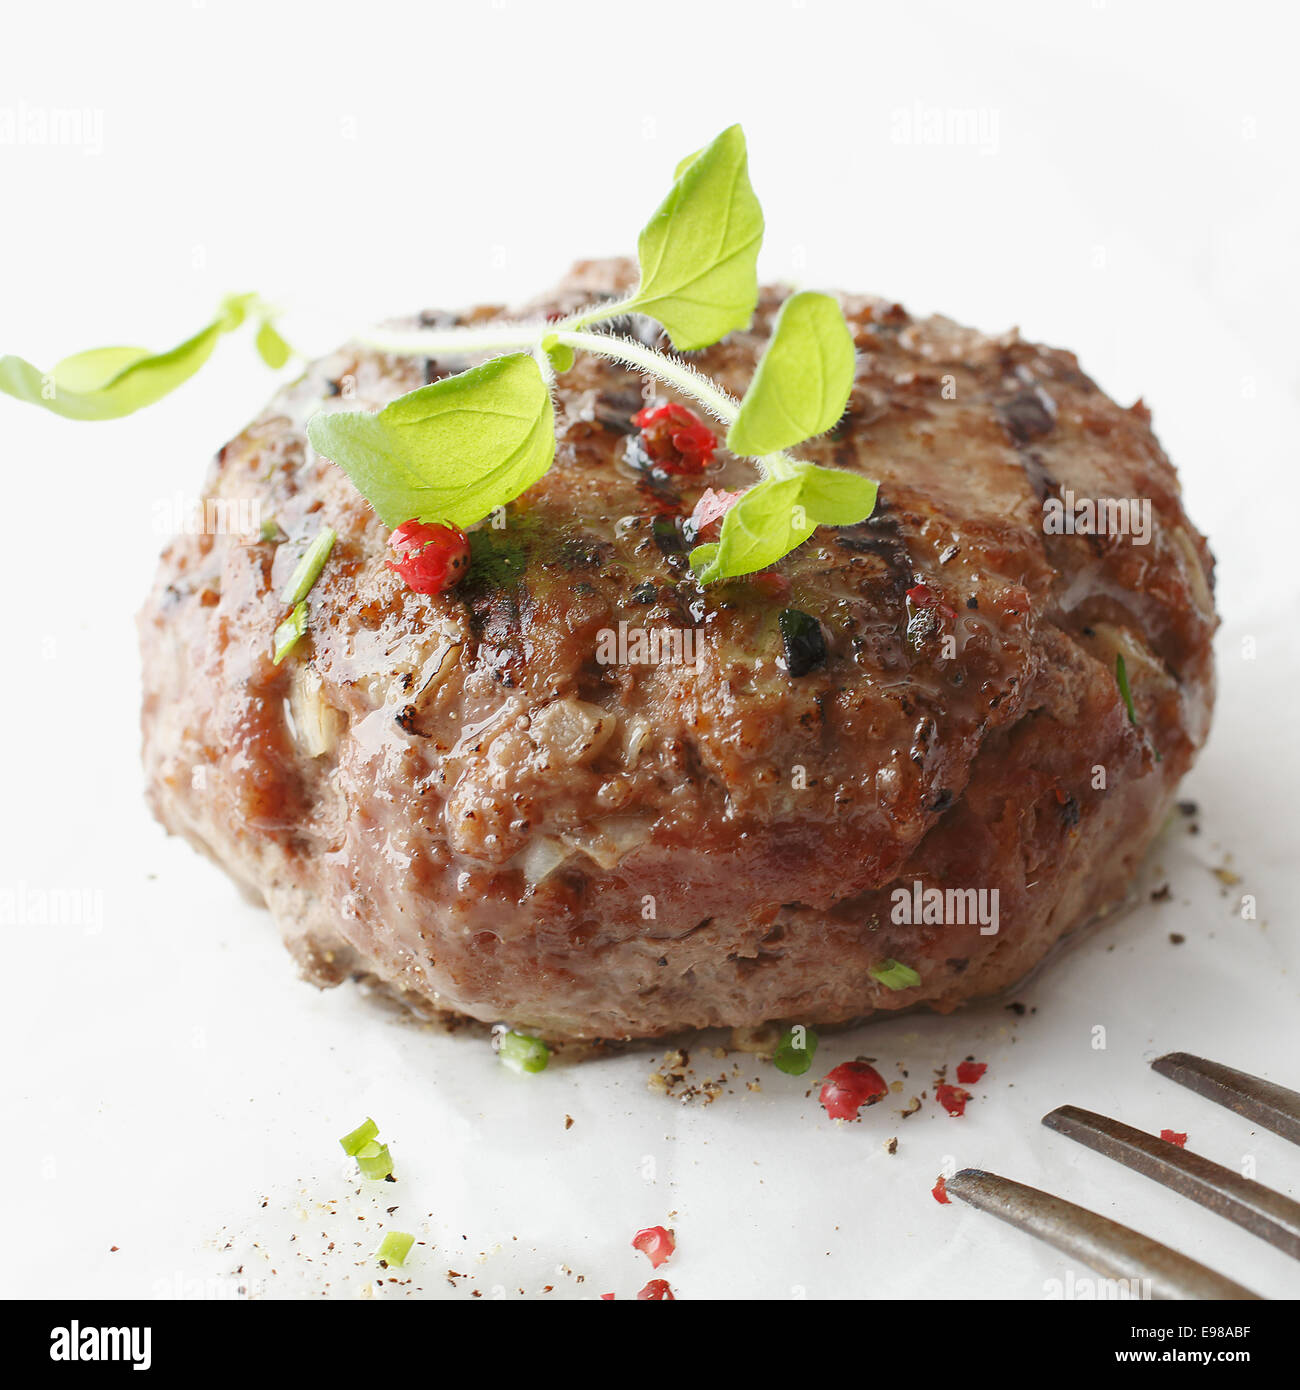 Closeup of a tasty seasoned meatball made from ground or minced beef garnished with herbs served on a white plate Stock Photo